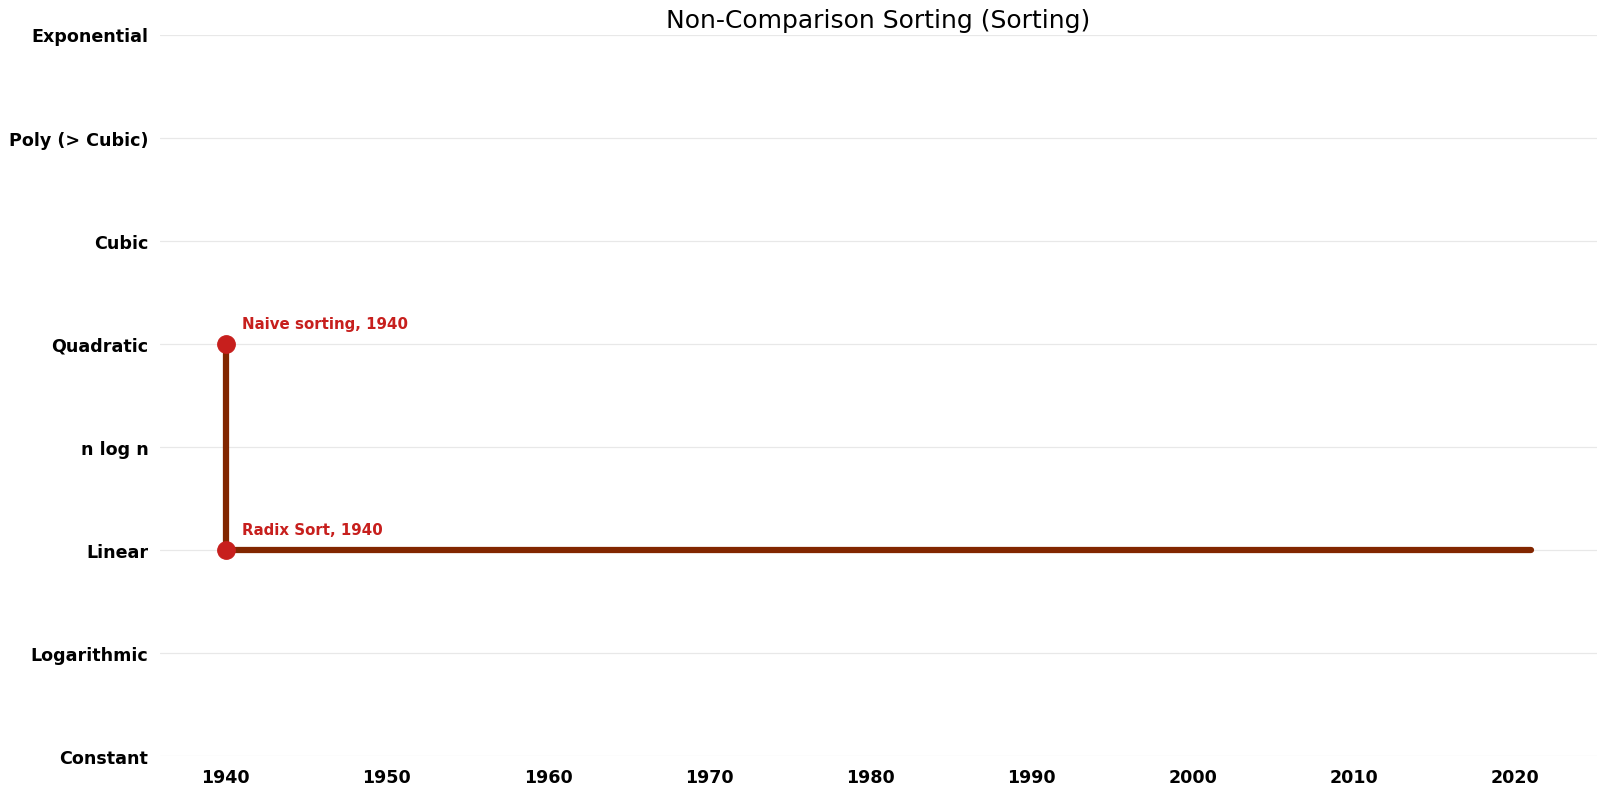 File:Sorting - Non-Comparison Sorting - Time.png